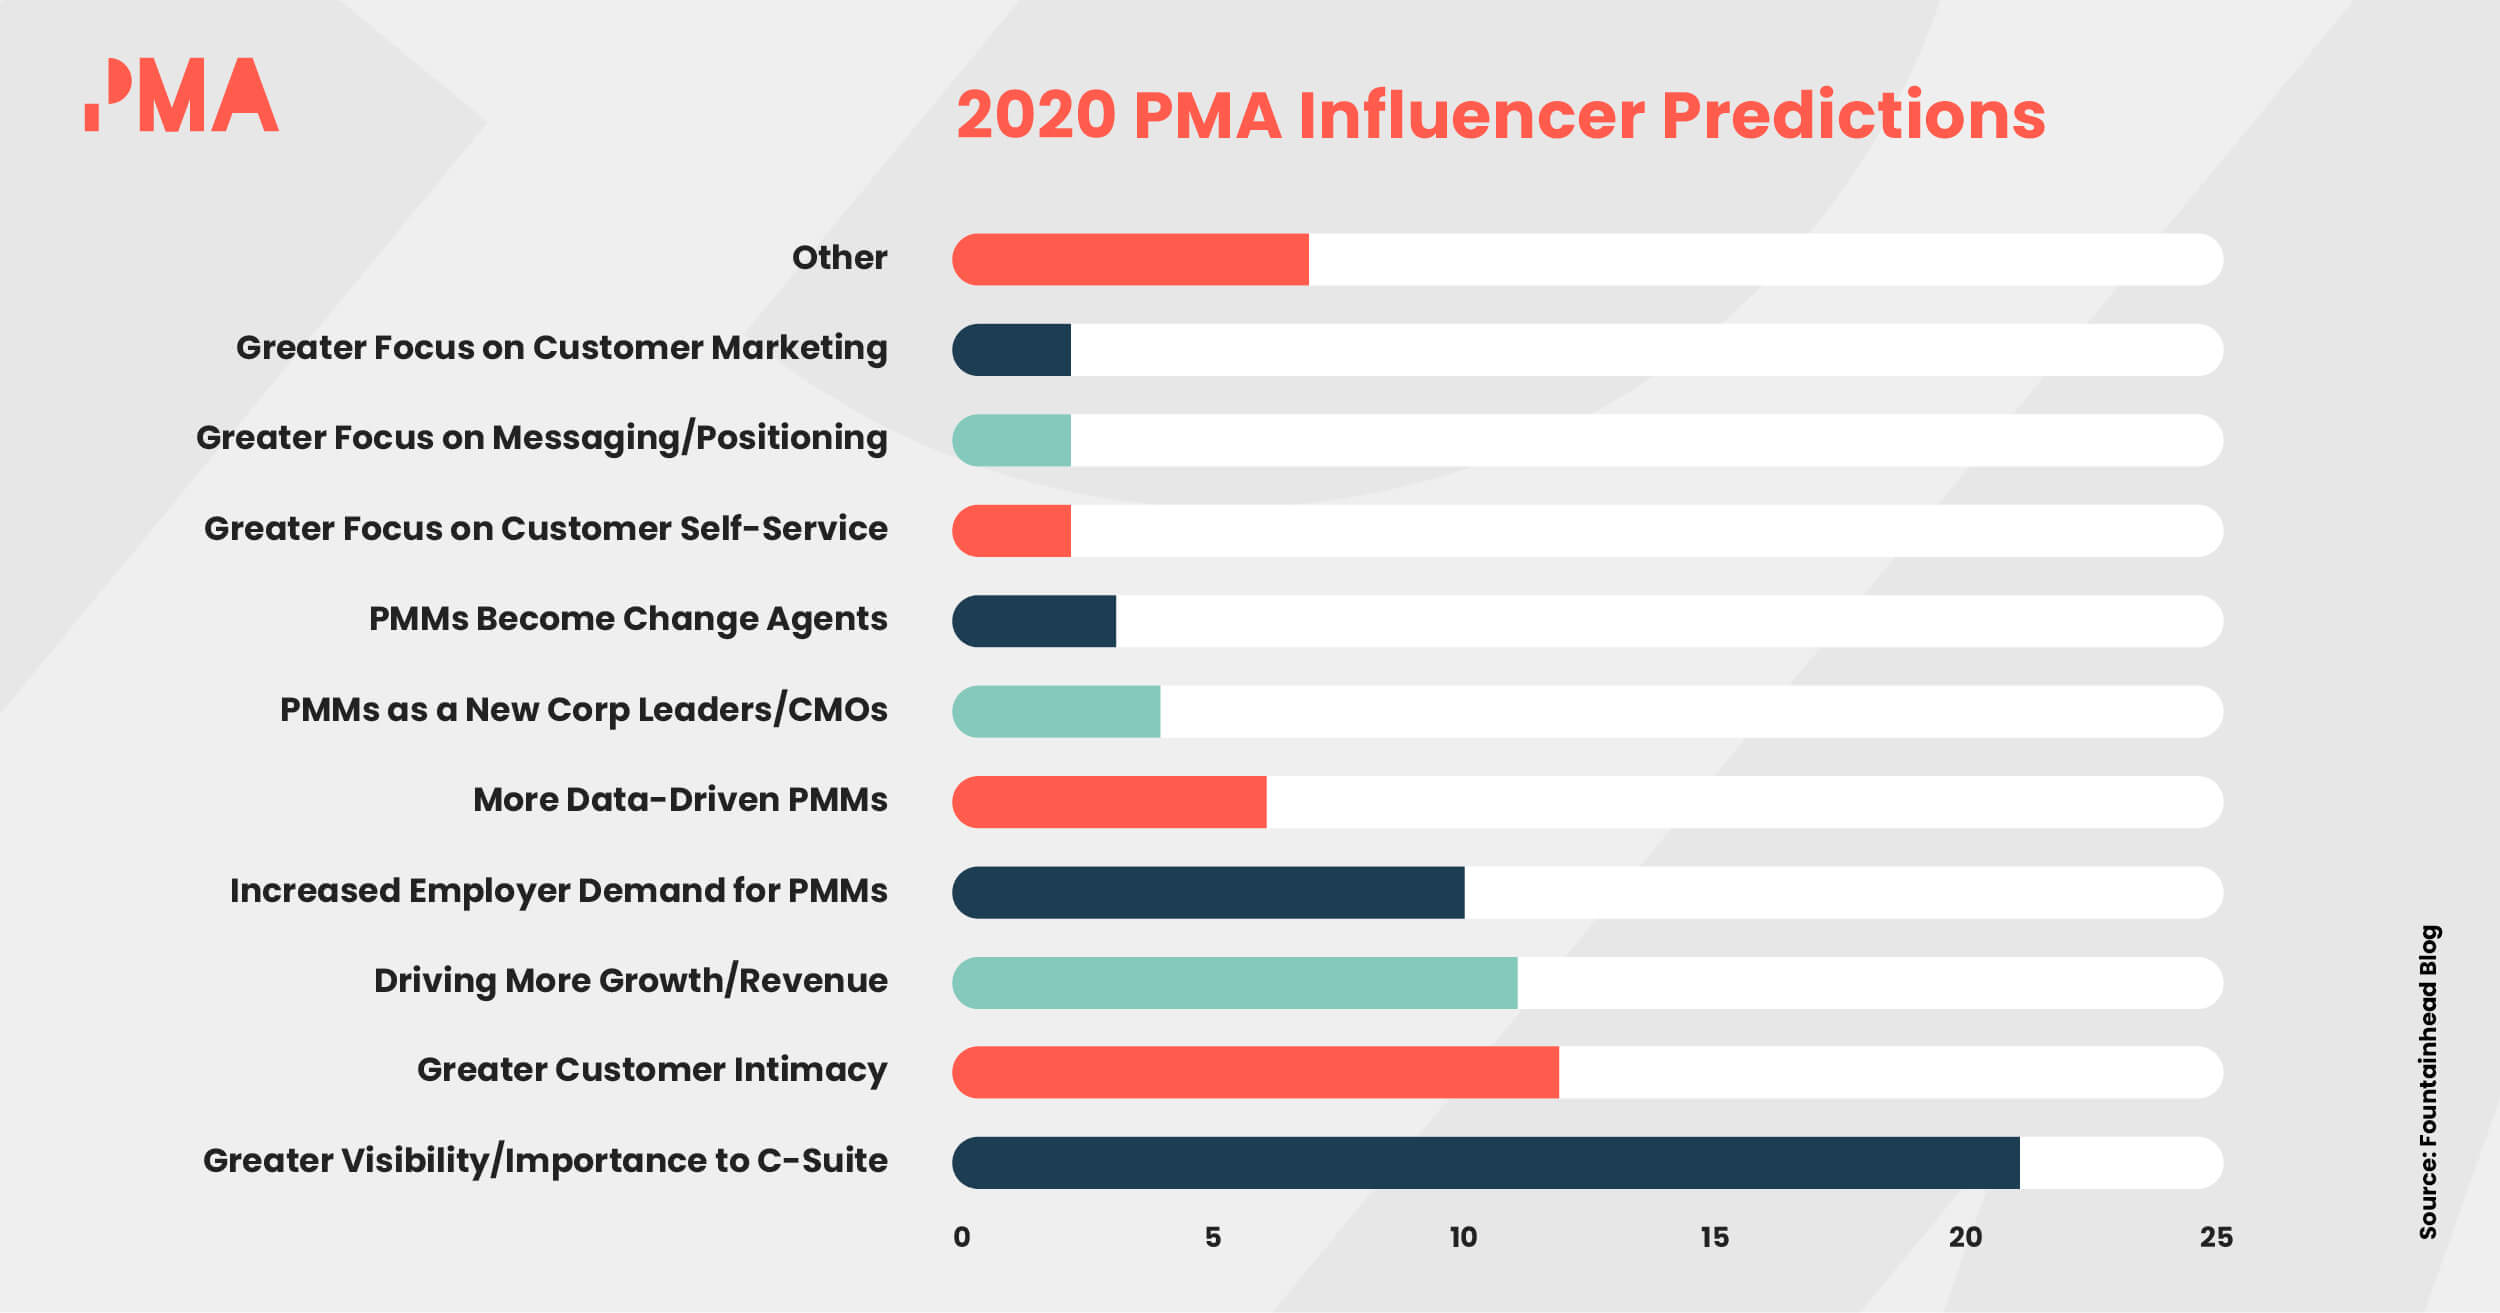 Bar chart depicting the subjects of the influencers predictions 